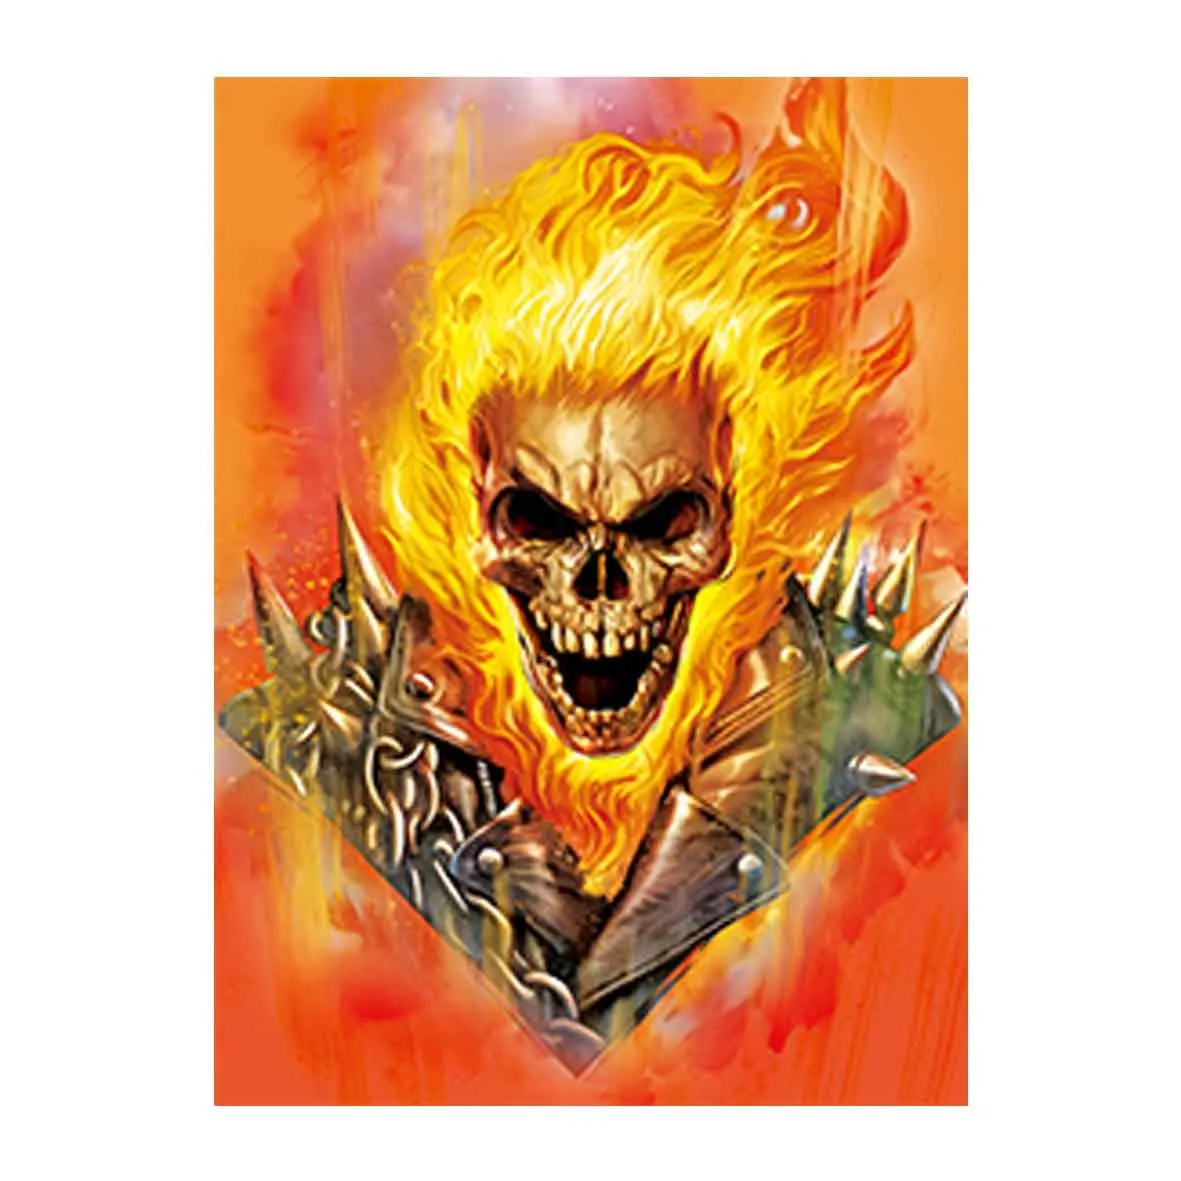 Skul' On Fire The Halloween Decoration Poster 3D lenticolare Moving Picture